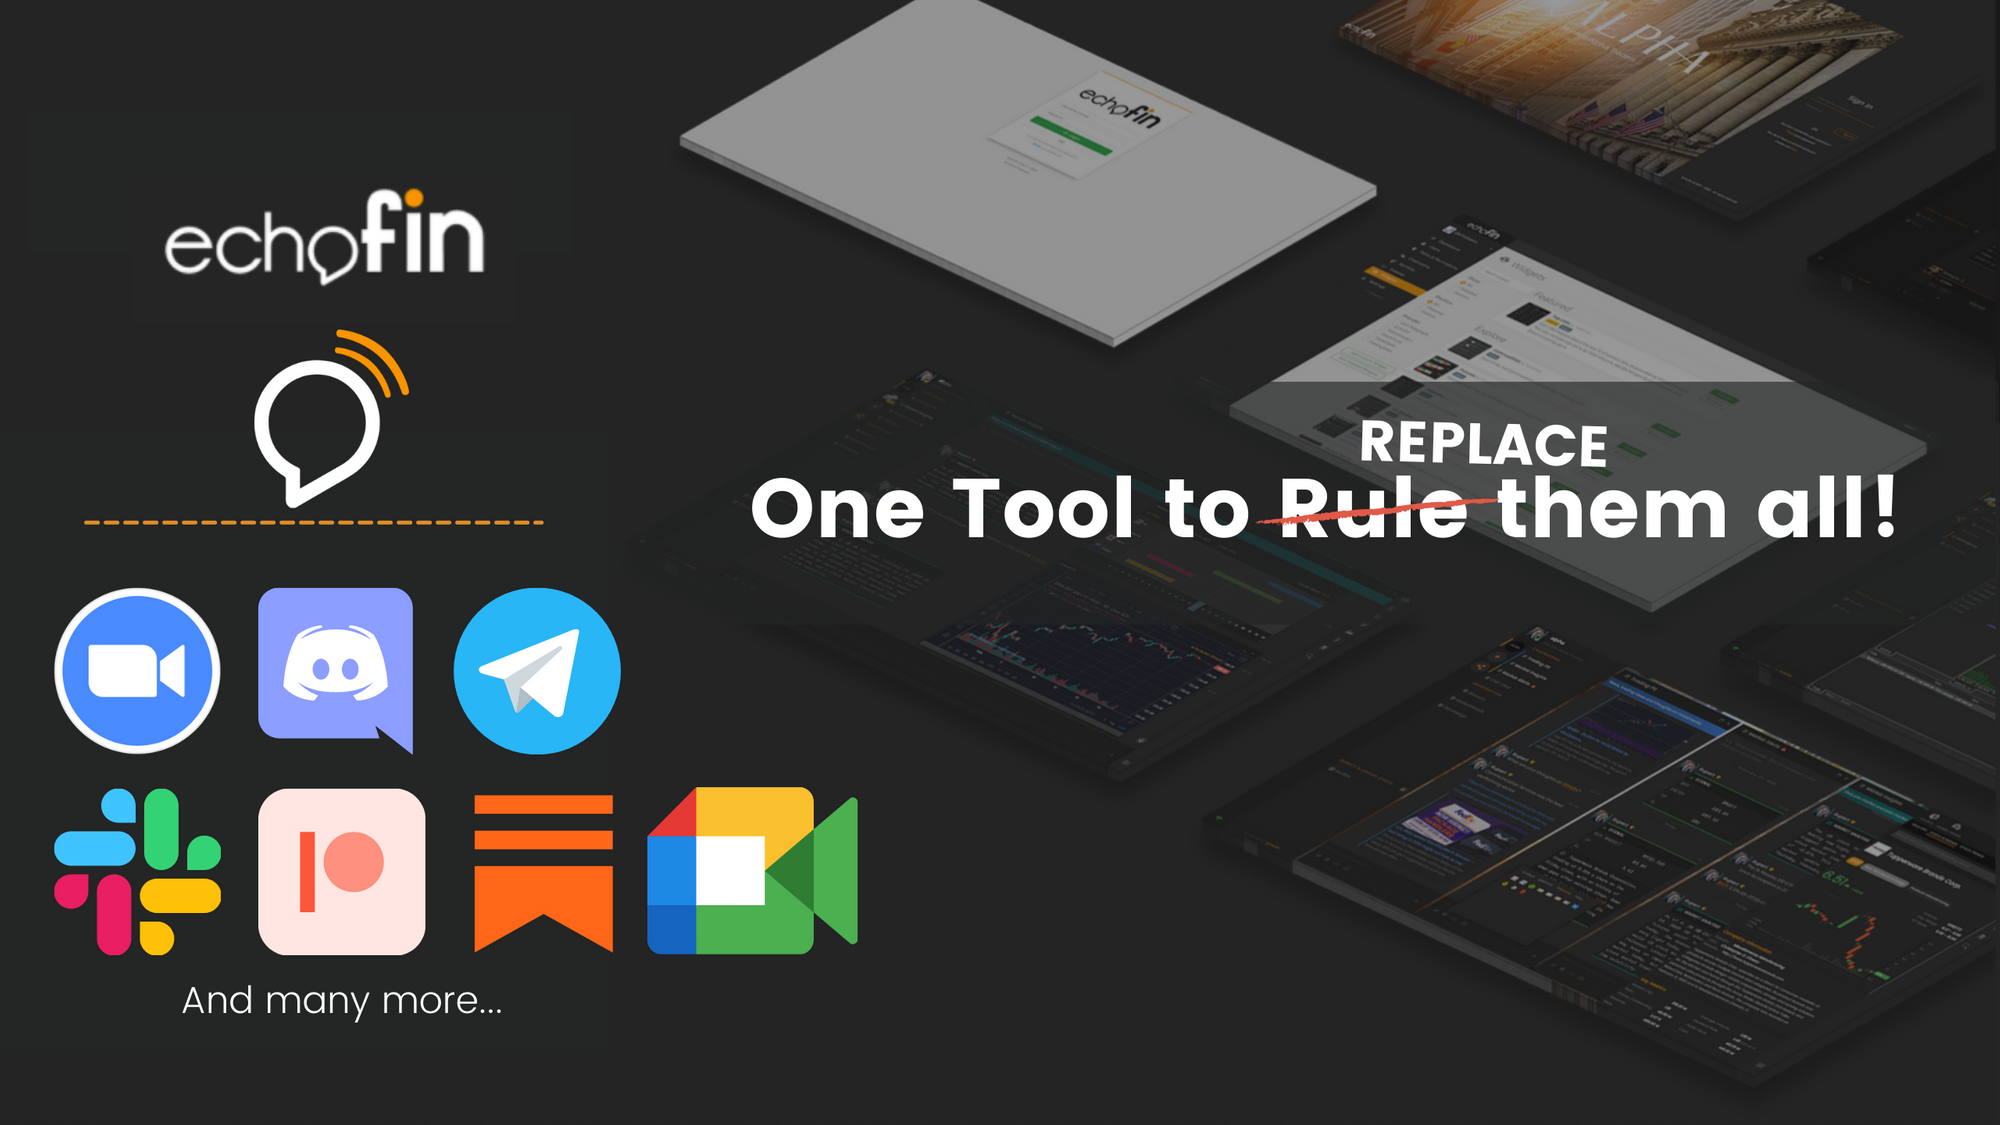 How many tools you can replace with Echofin?